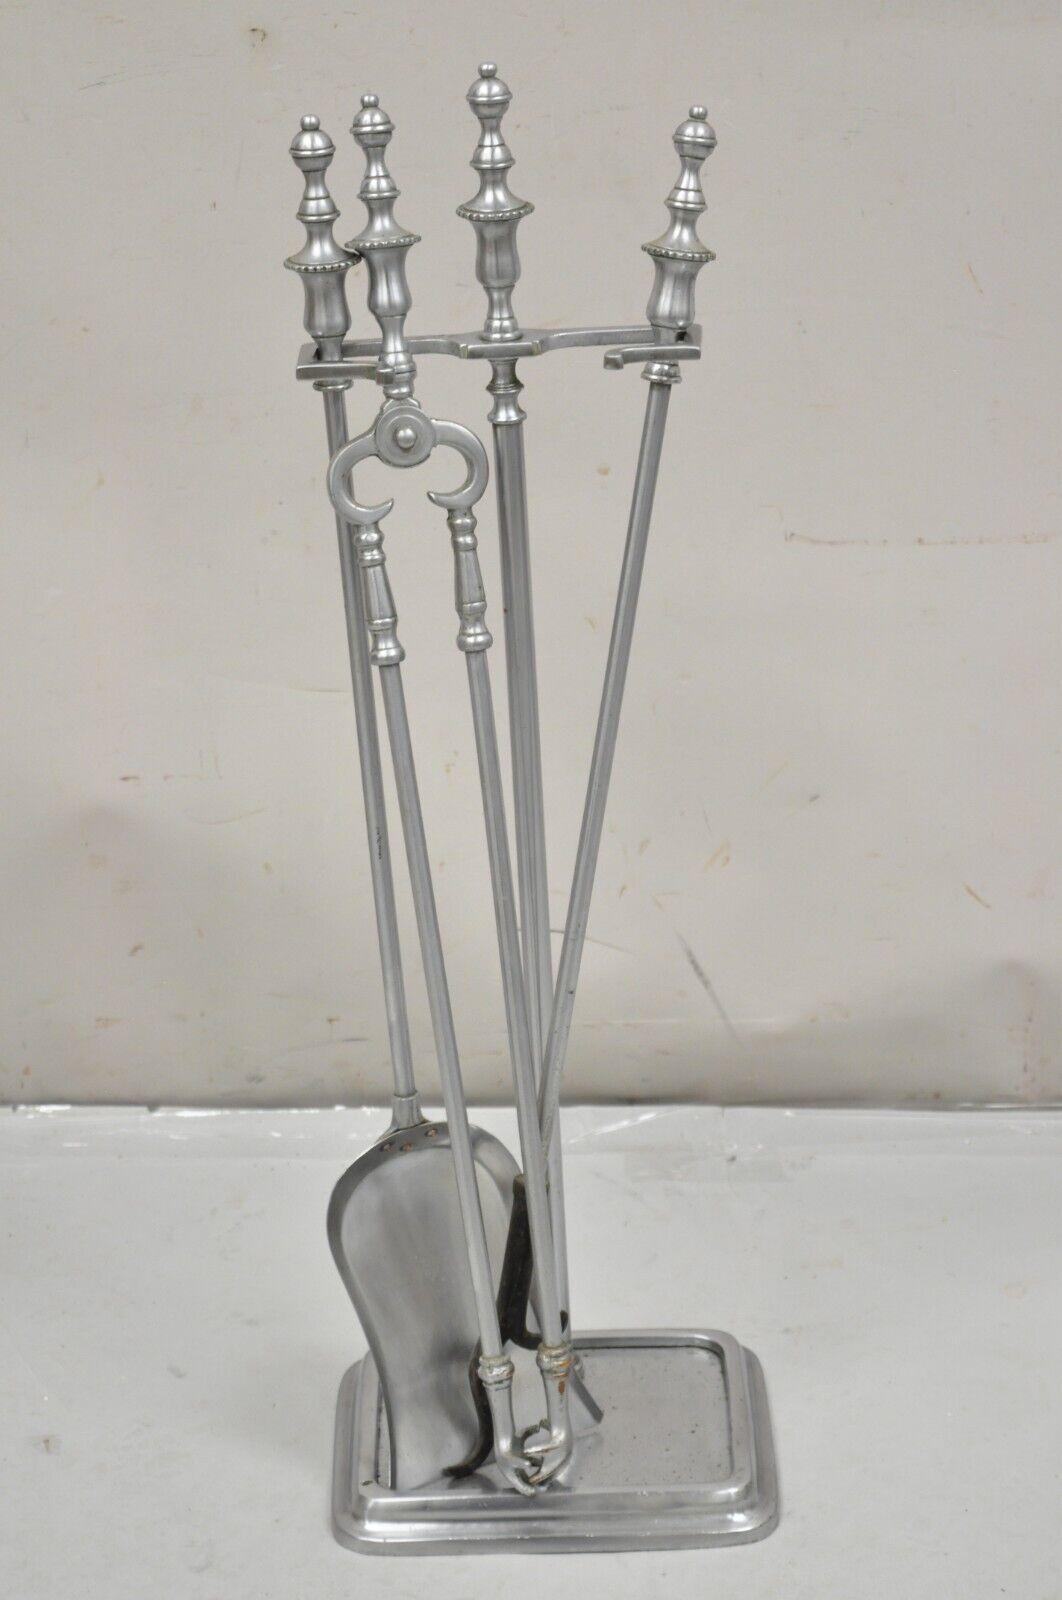 Vintage Silver Pewter Metal Federal Style Urn Finial Fireplace Tool Set - 4 Pc Set. Item featured set includes 3 tools and 1 stand, pewter finish, very nice vintage set. Circa Mid 20th Century. Measurements: 30.5